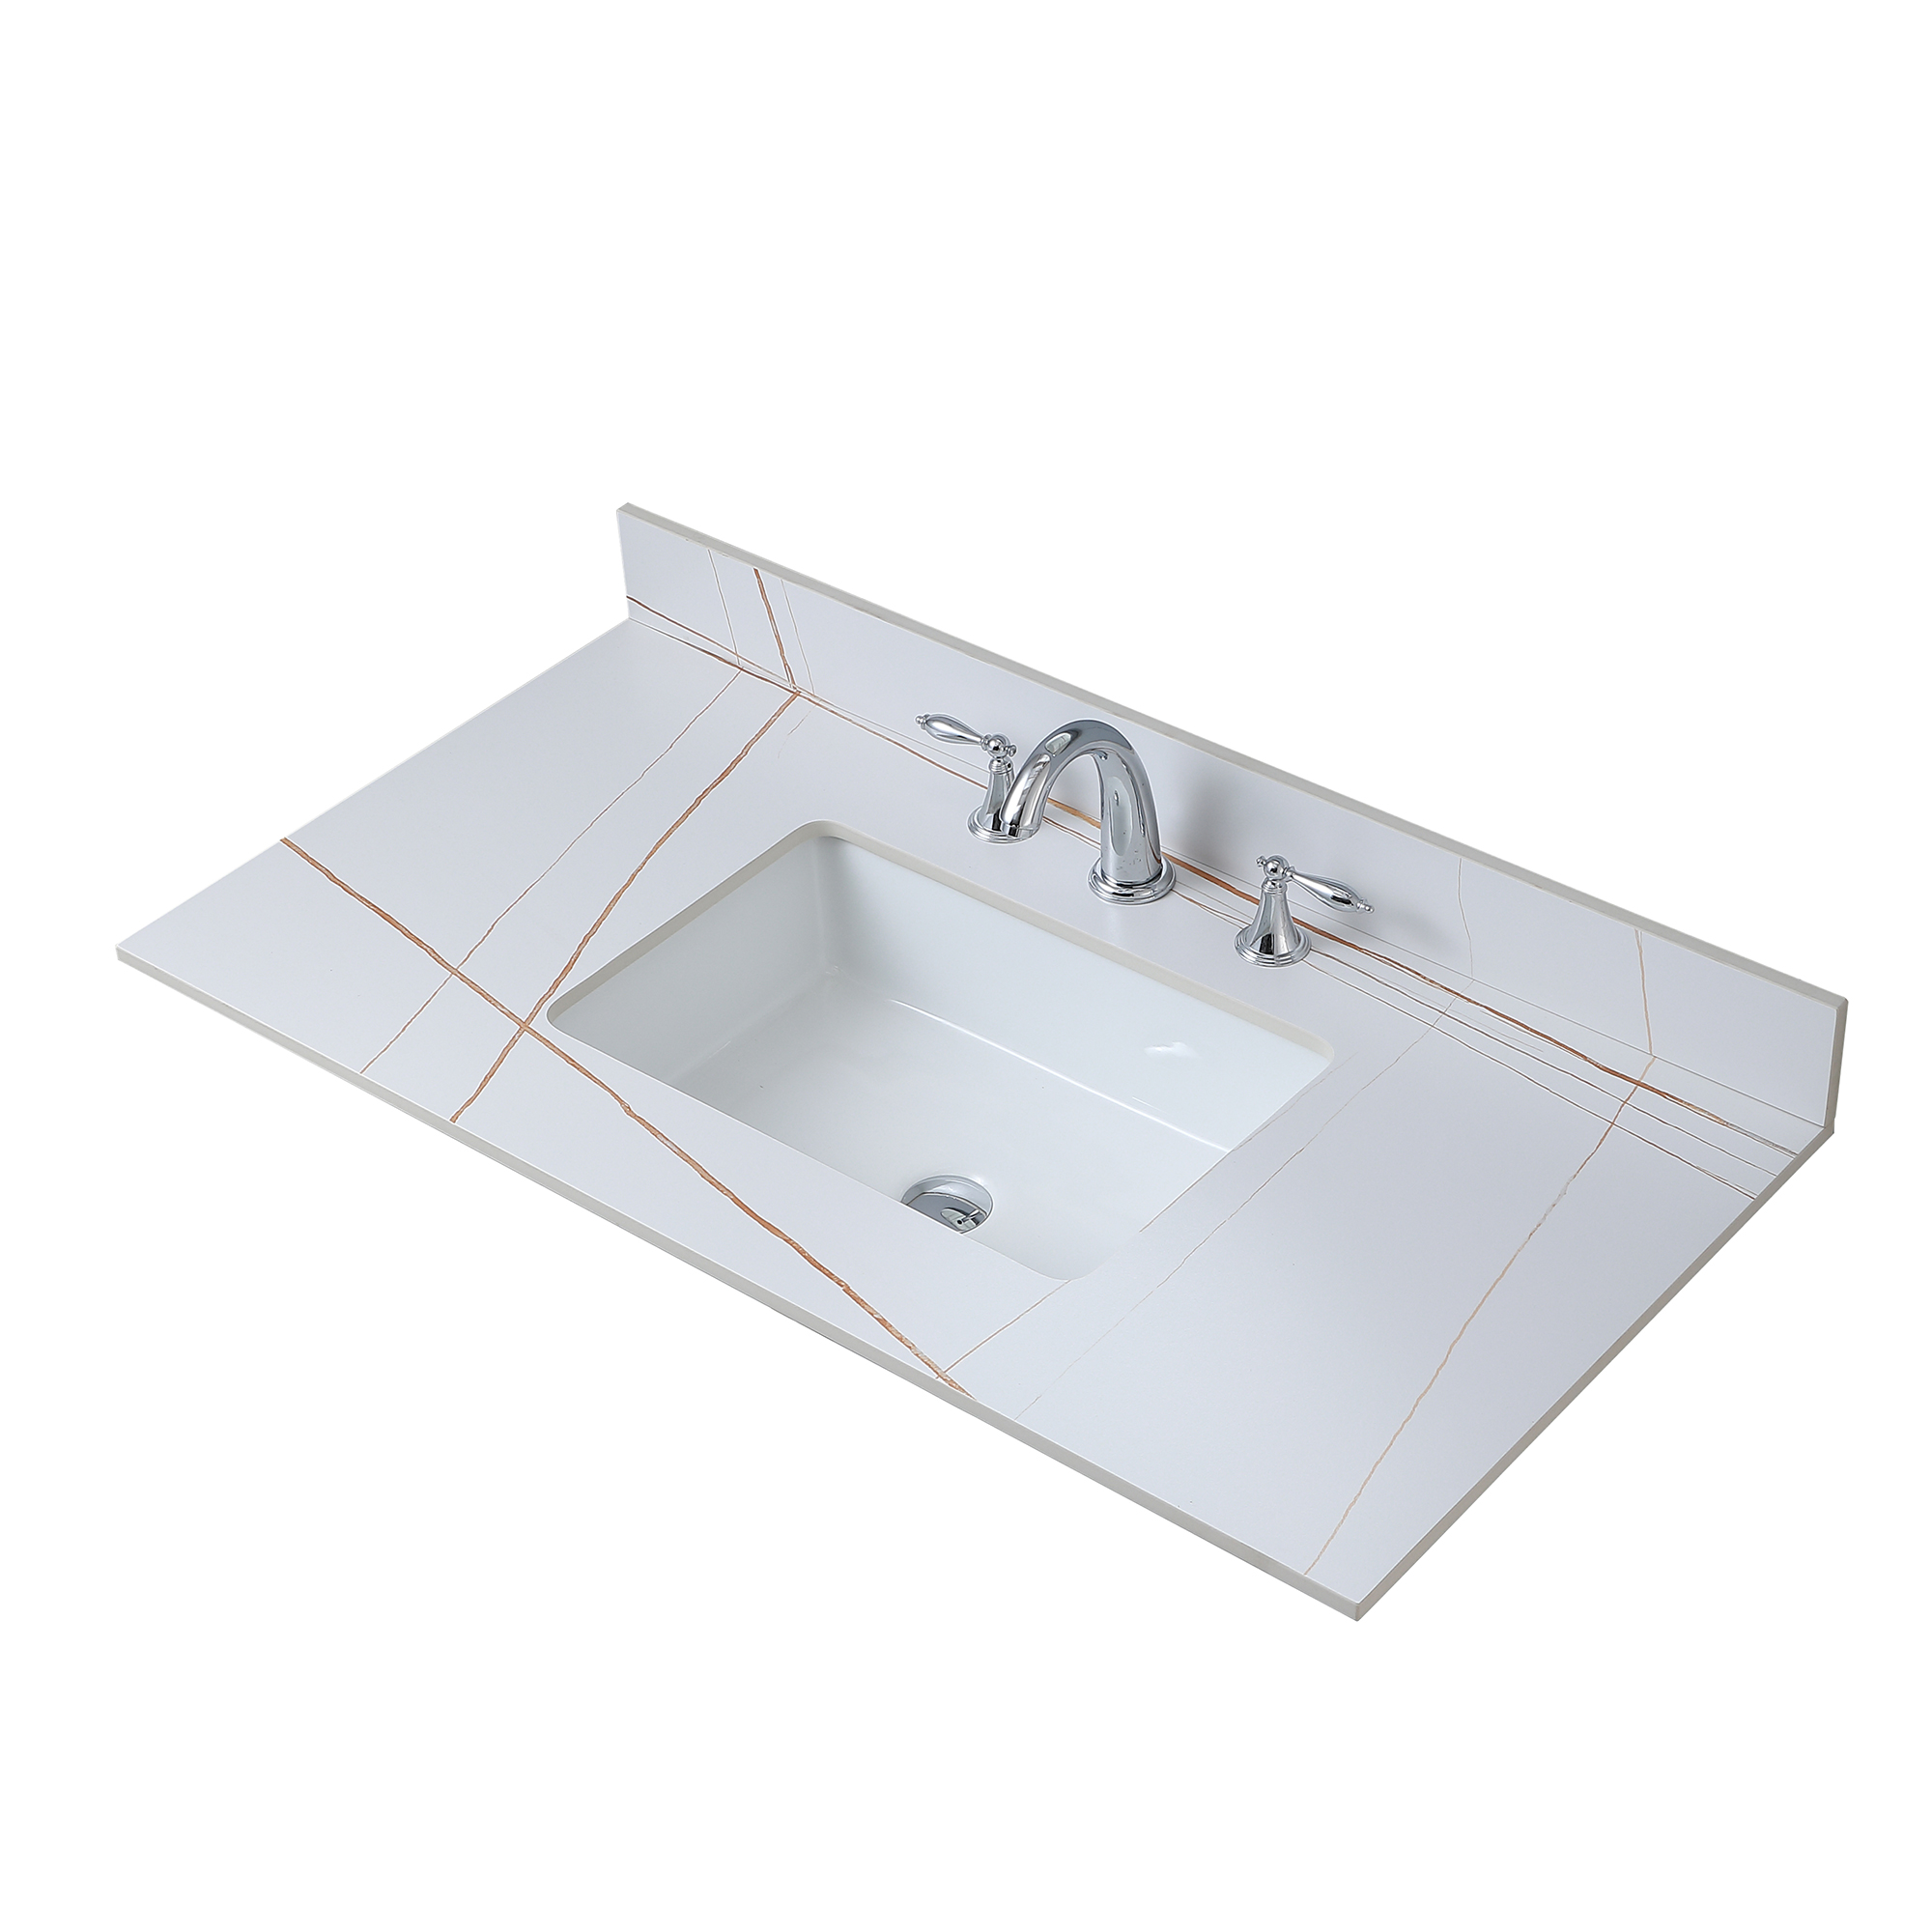 Montary 43" Bathroom Vanity Top Stone Carrara White Tops with Three Faucet Hole and Undermount Ceramic Sink